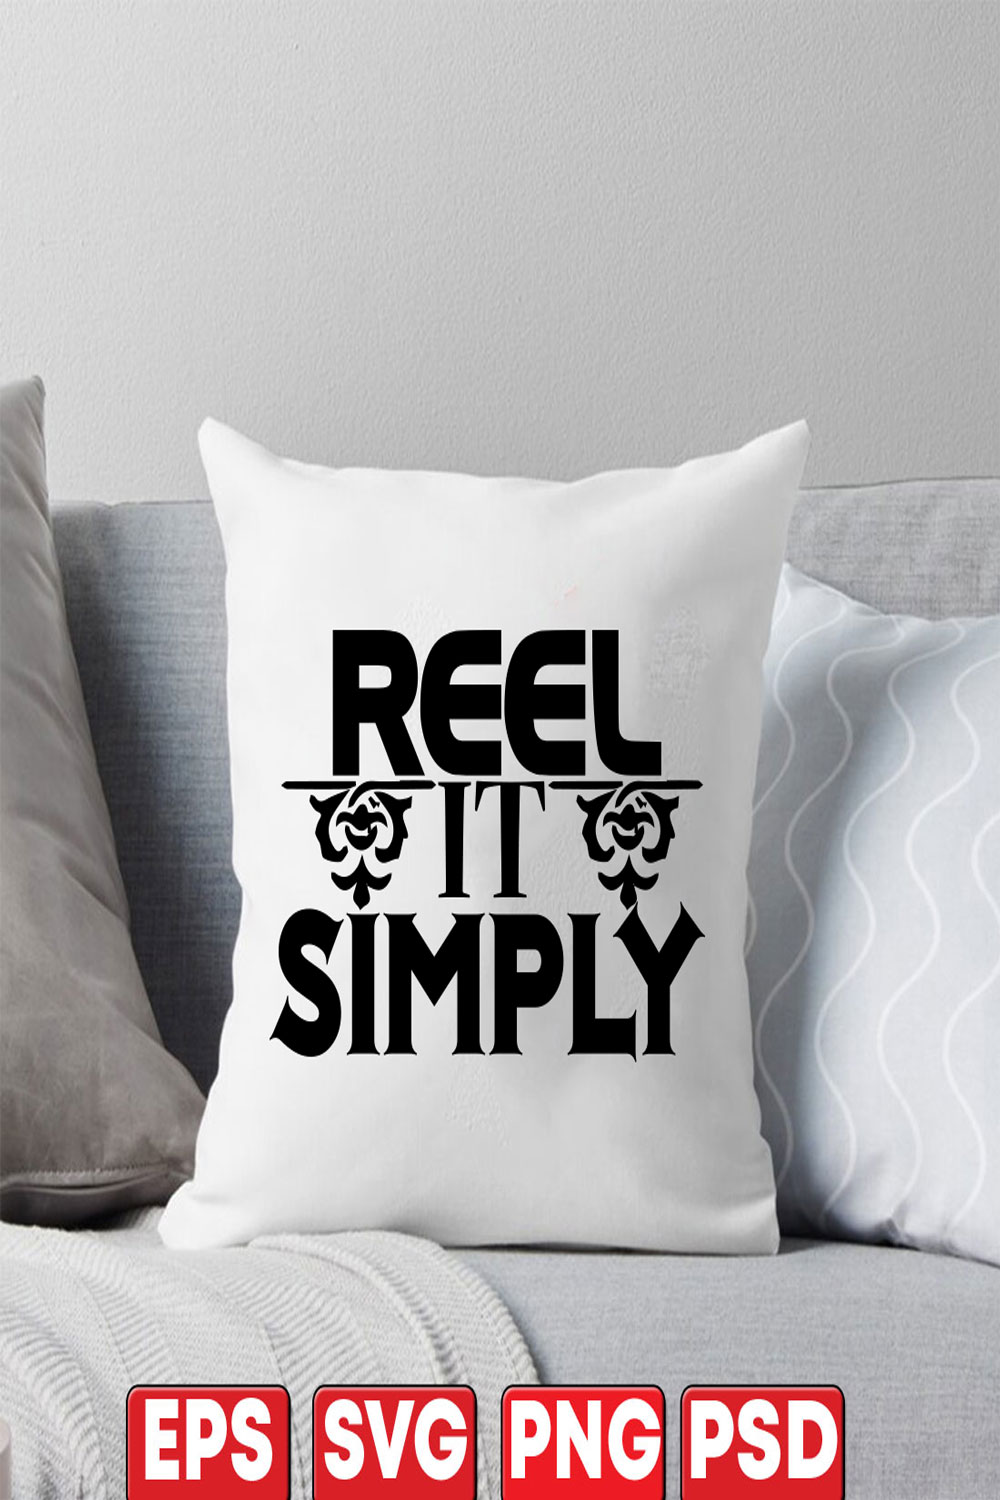 Reel-it-simply pinterest preview image.